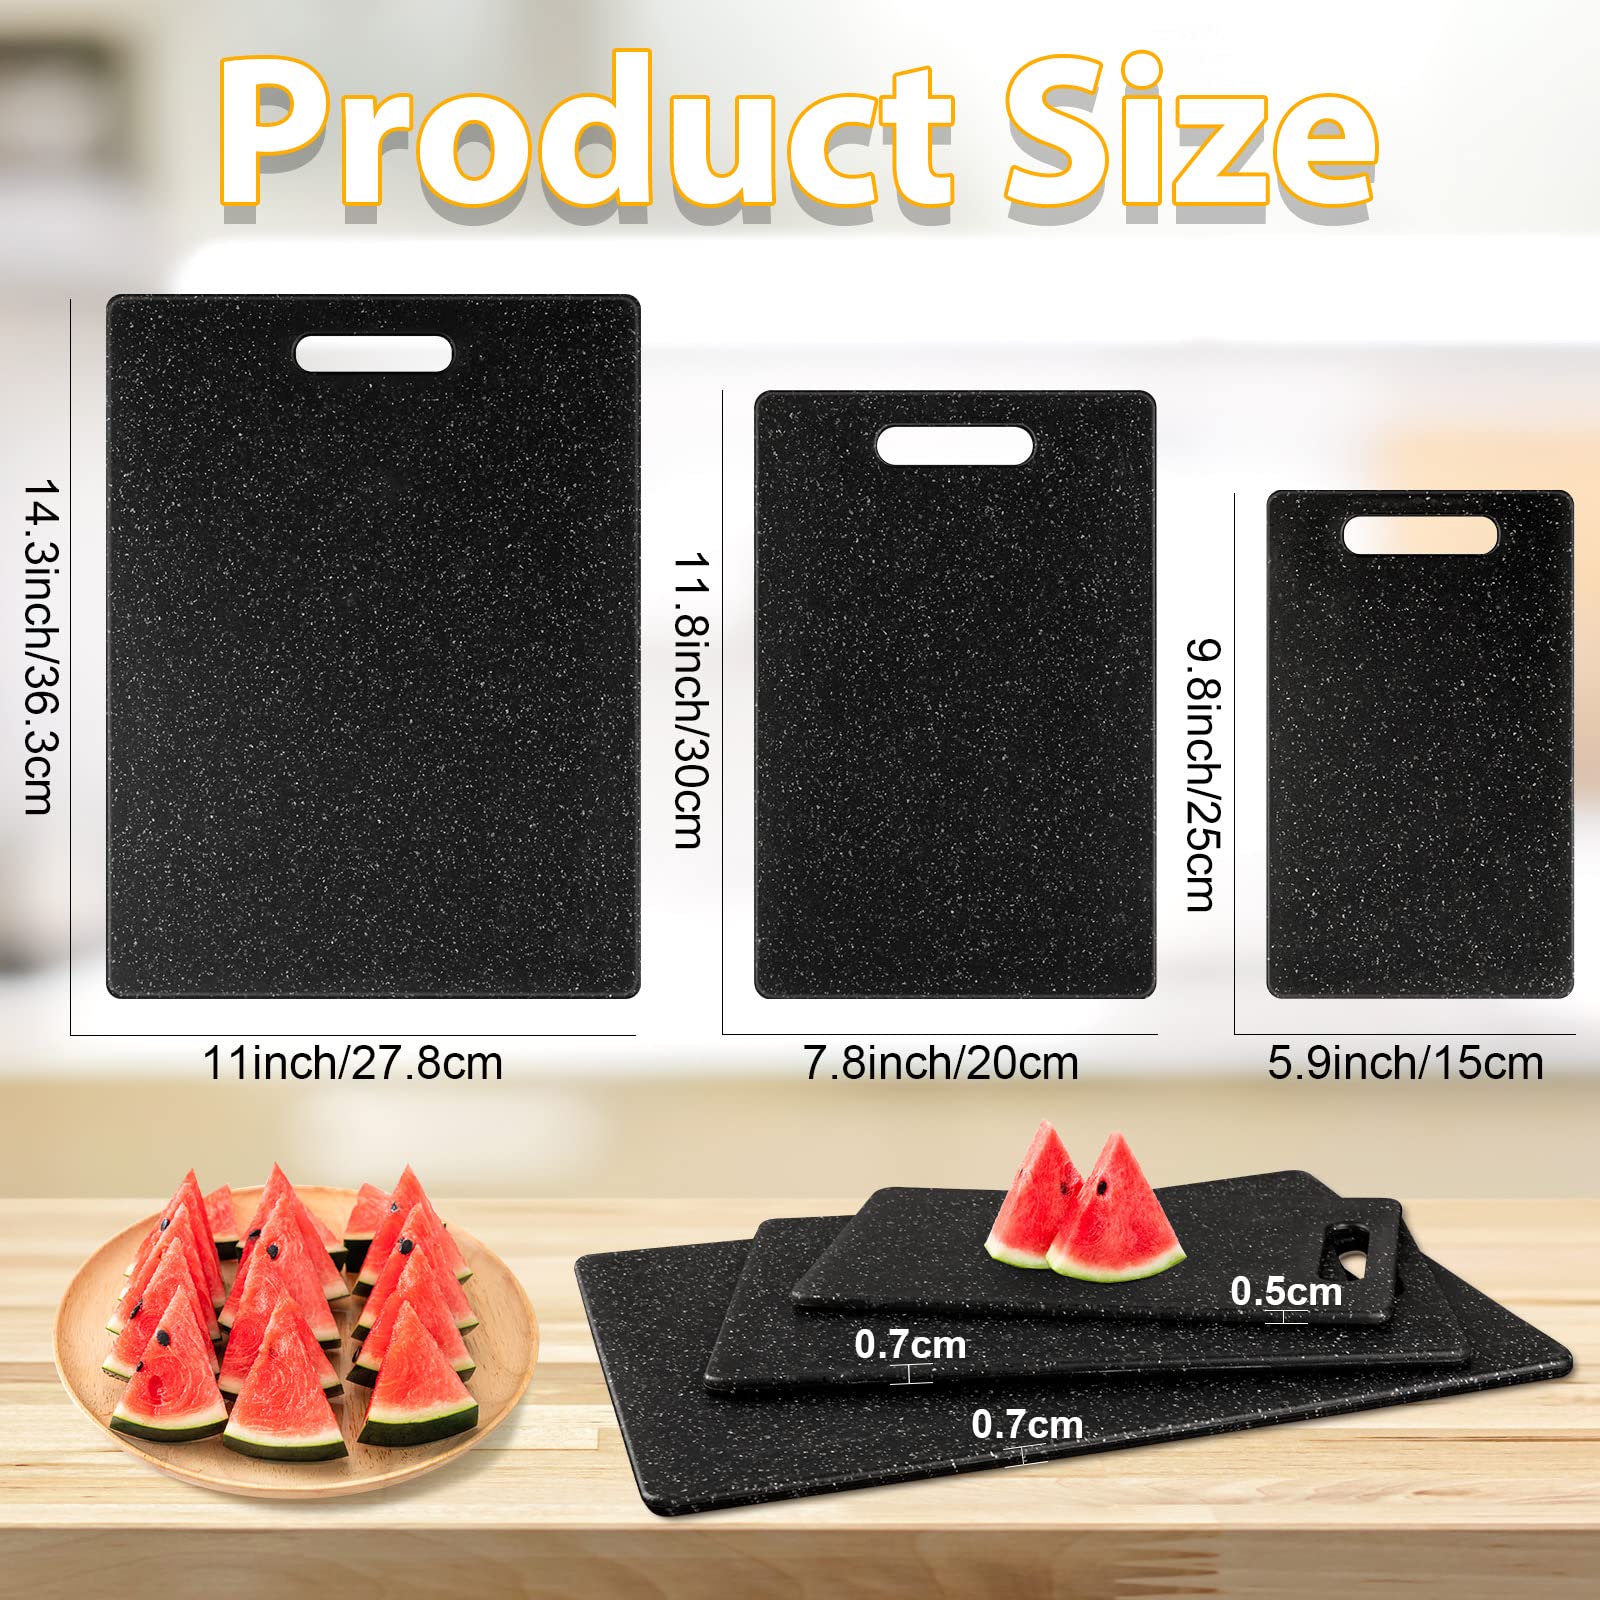 Plastic Cutting Board Set of 3, Kitchen Cutting Board, Dishwasher Safe, Easy to Clean and Grip Chopping Boards for Meat Veggies, 3 Size (Black)